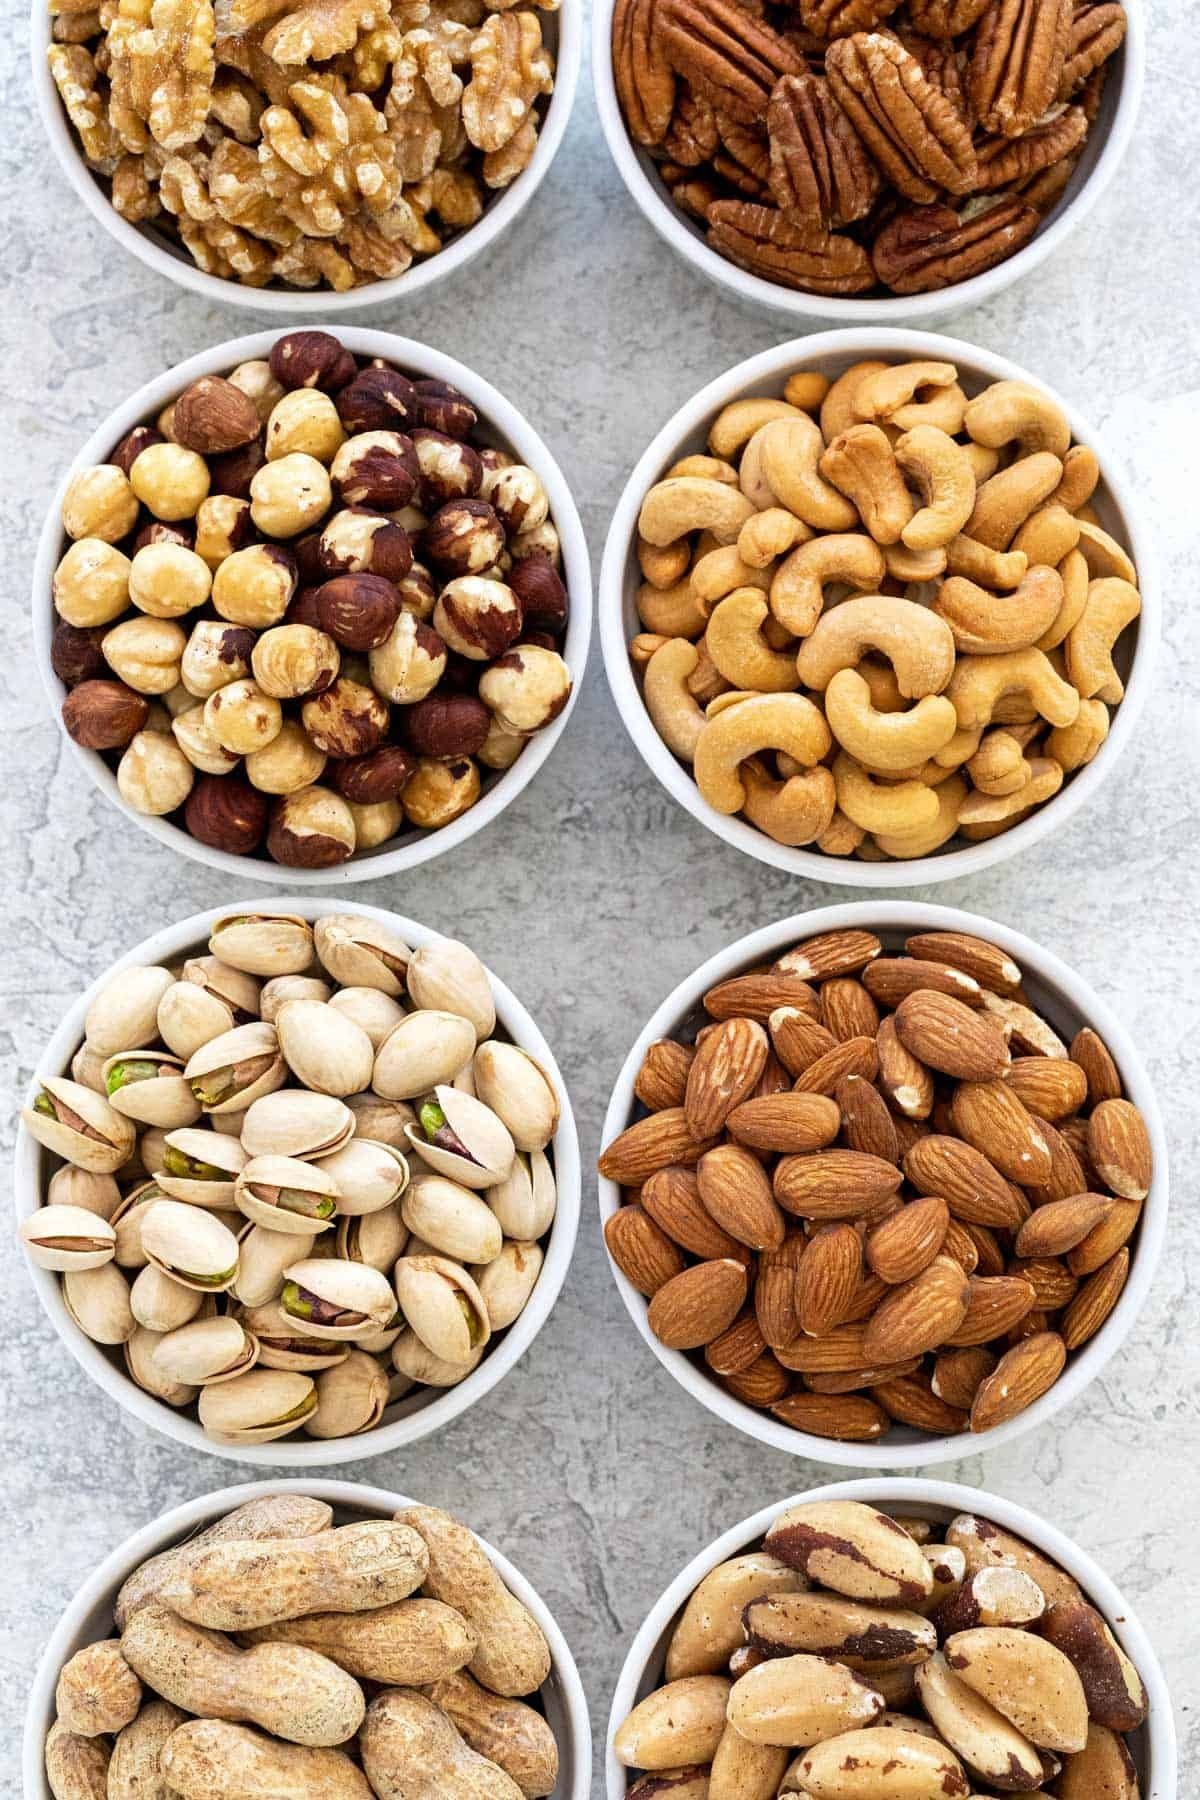 nuts is the source of biotin